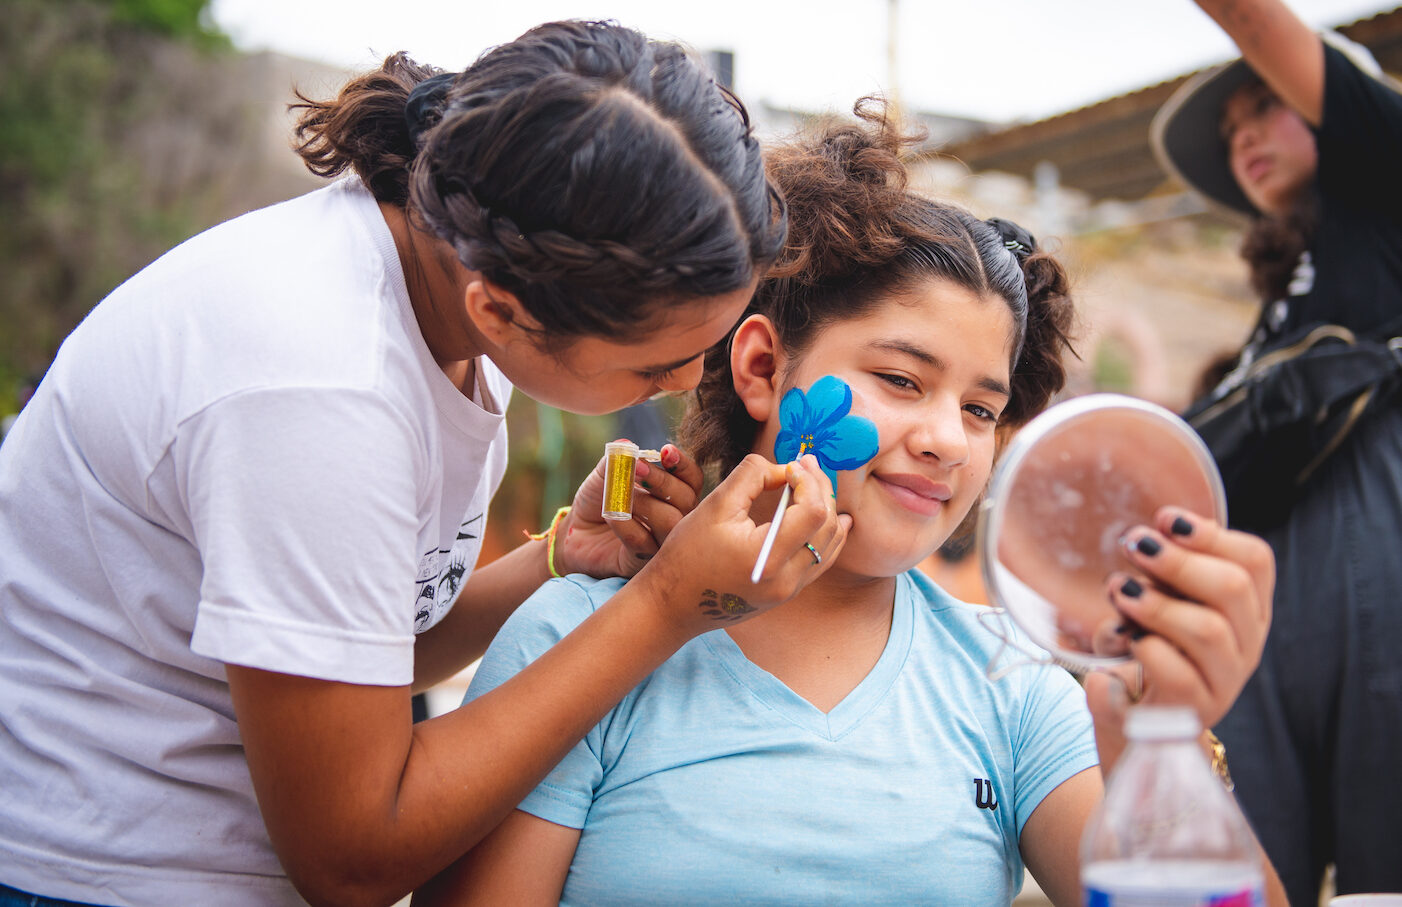 Girls face painting with supplies donated by San Diego charity Unity 4 Orphans